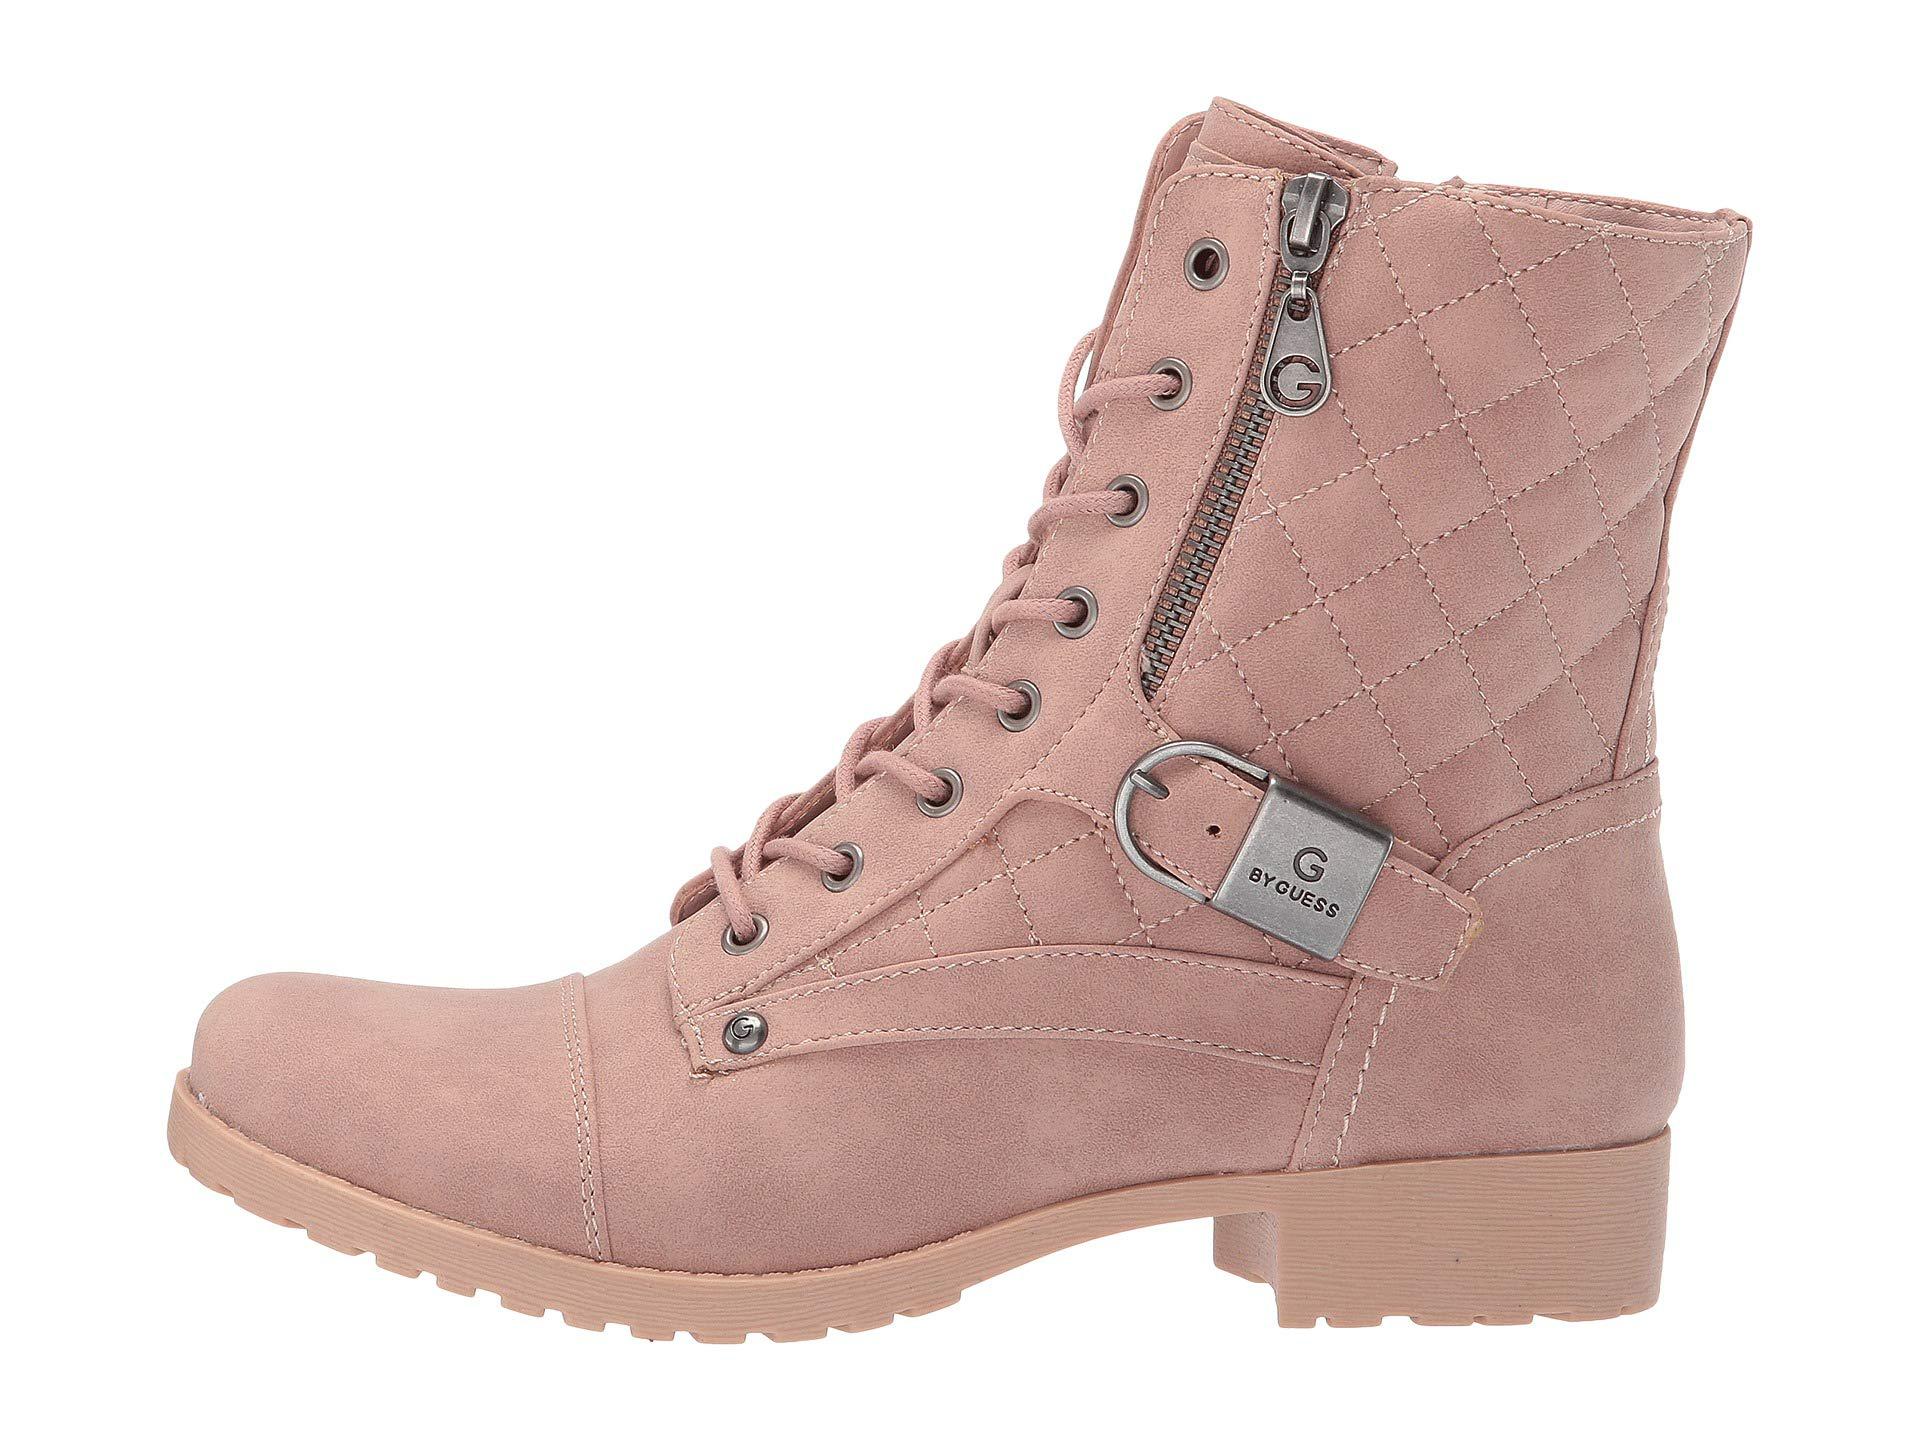 guess boots pink